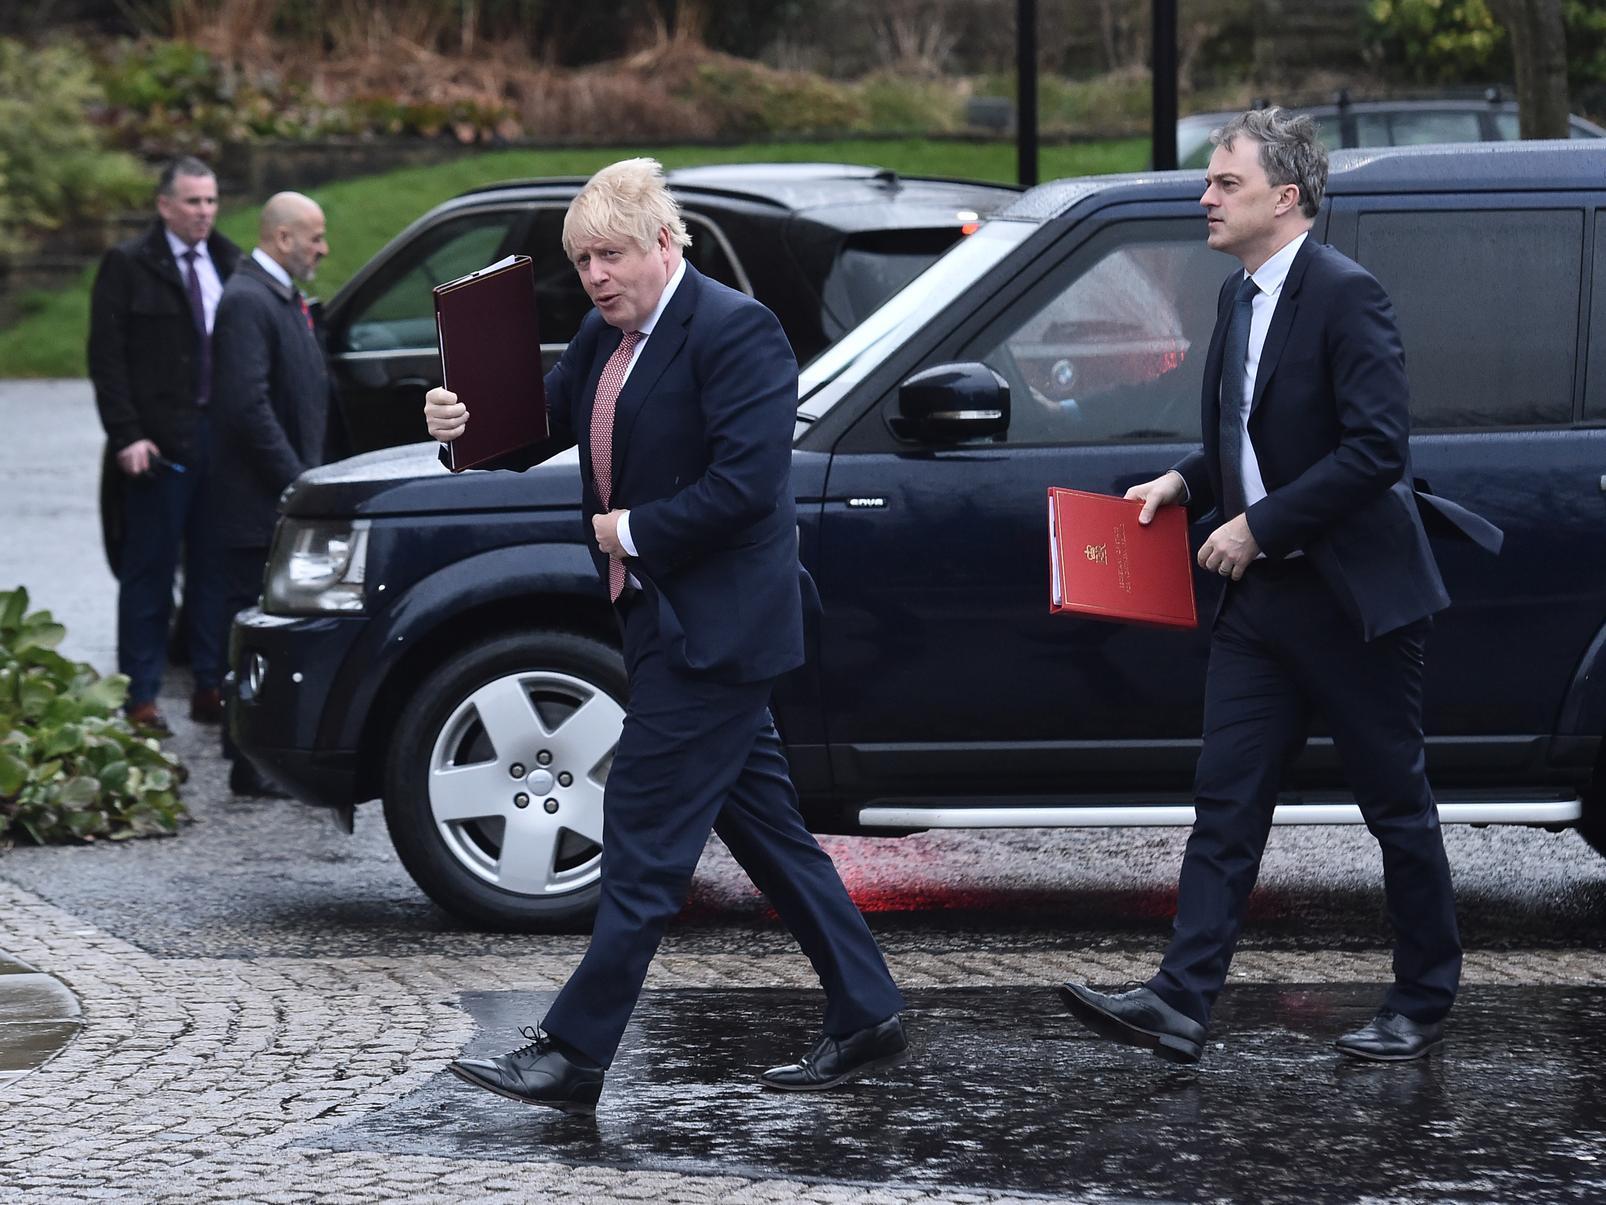 Prime Minister Boris Johnson and Secretary of State for Northern Ireland, Julian Smith